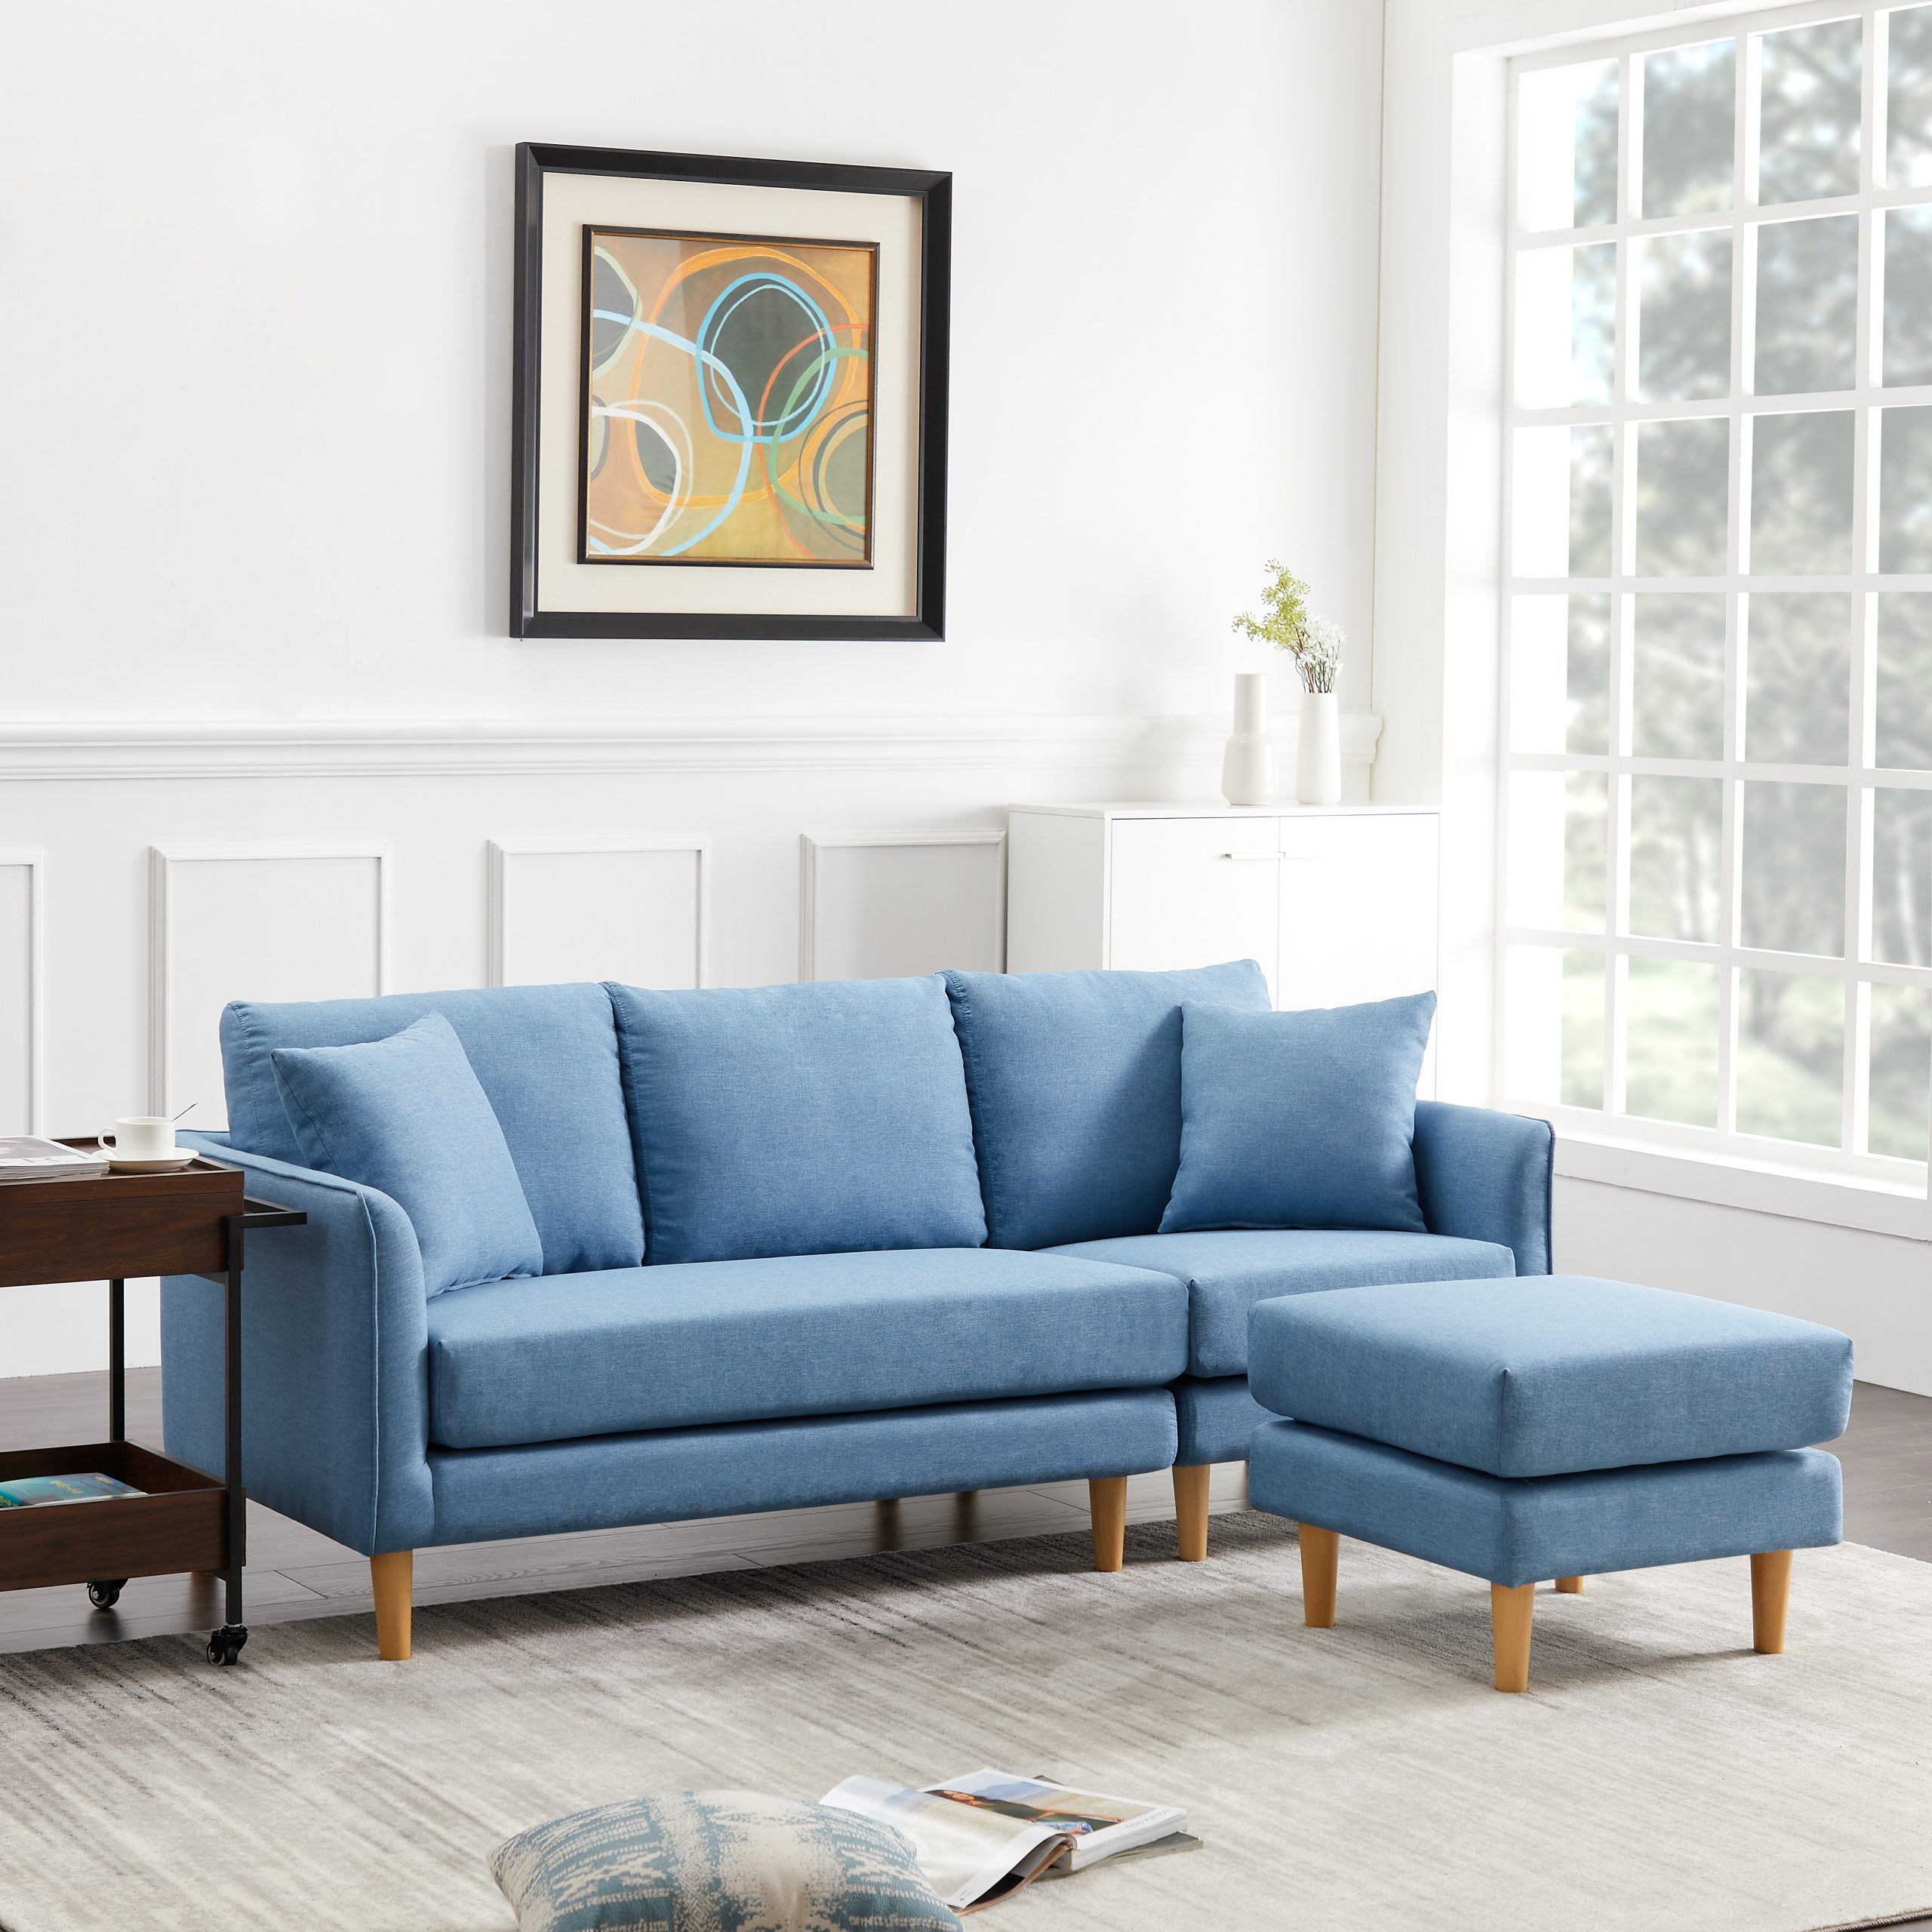 Urhomepro Reversible Sectional Sofa Couch, Modern 3 Seat Pertaining To Dove Mid Century Sectional Sofas Dark Blue (View 7 of 15)